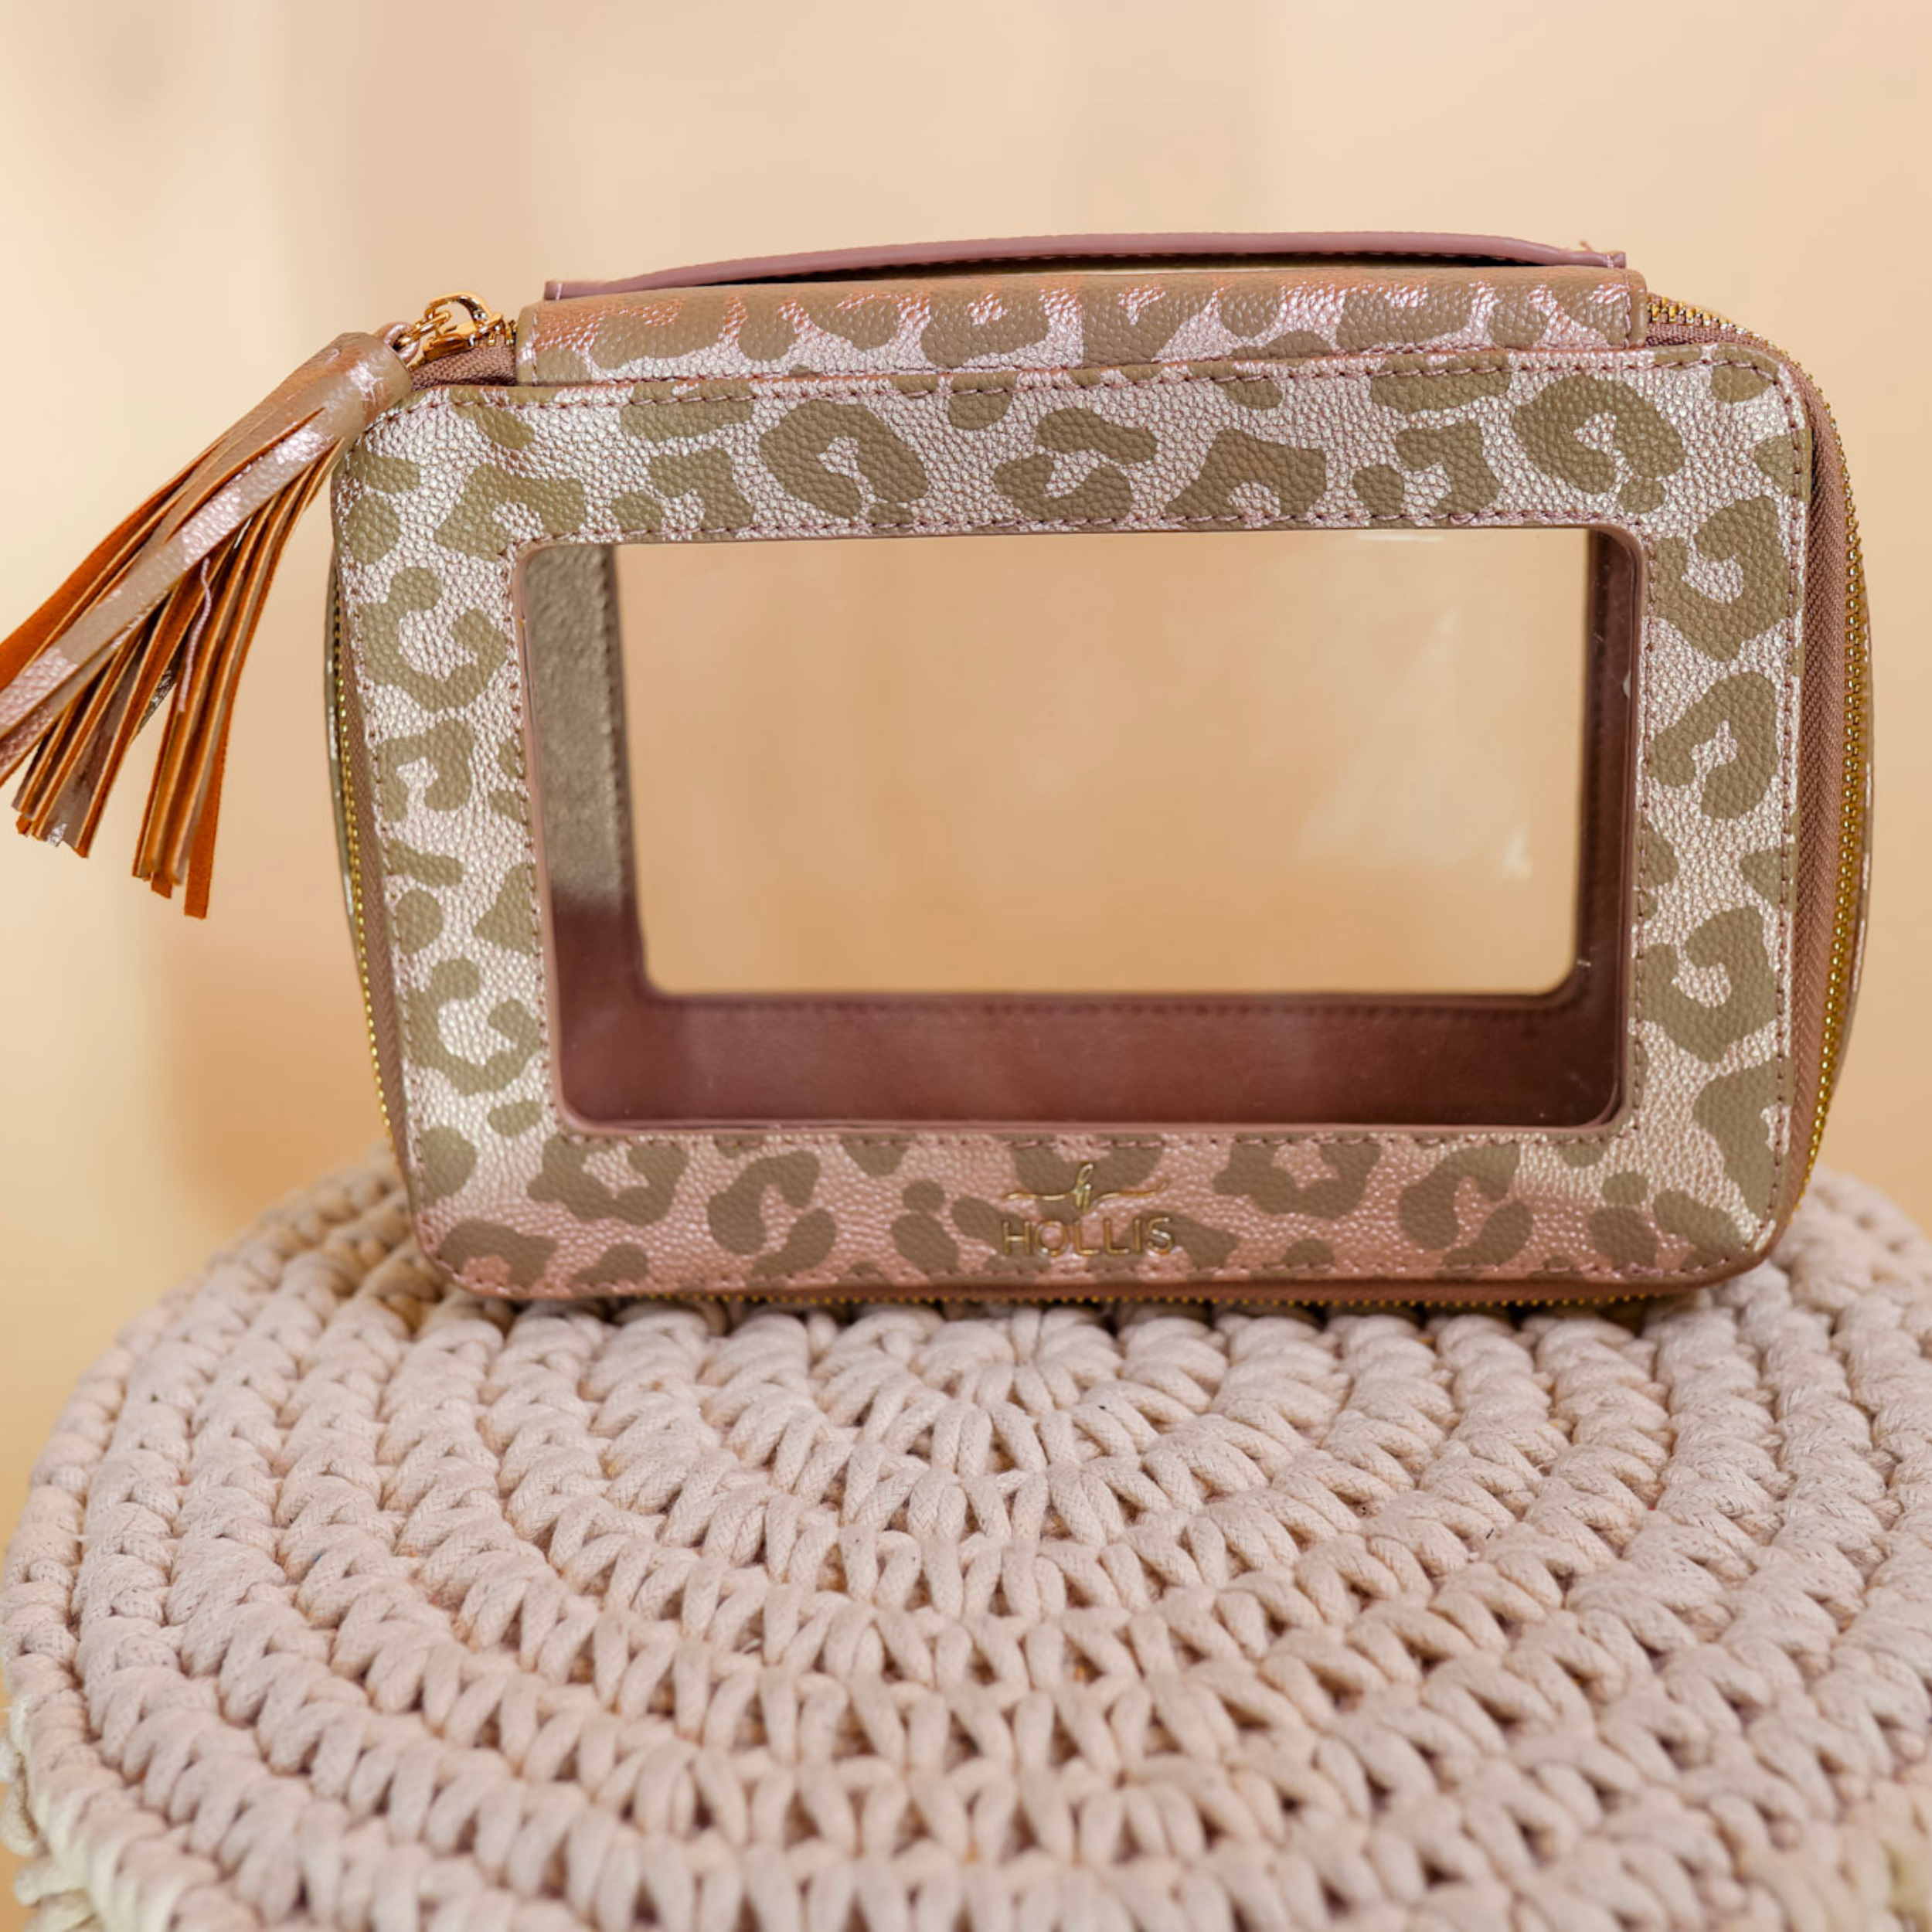 Hollis | Clear Toiletry Bag in Leopard - Giddy Up Glamour Boutique